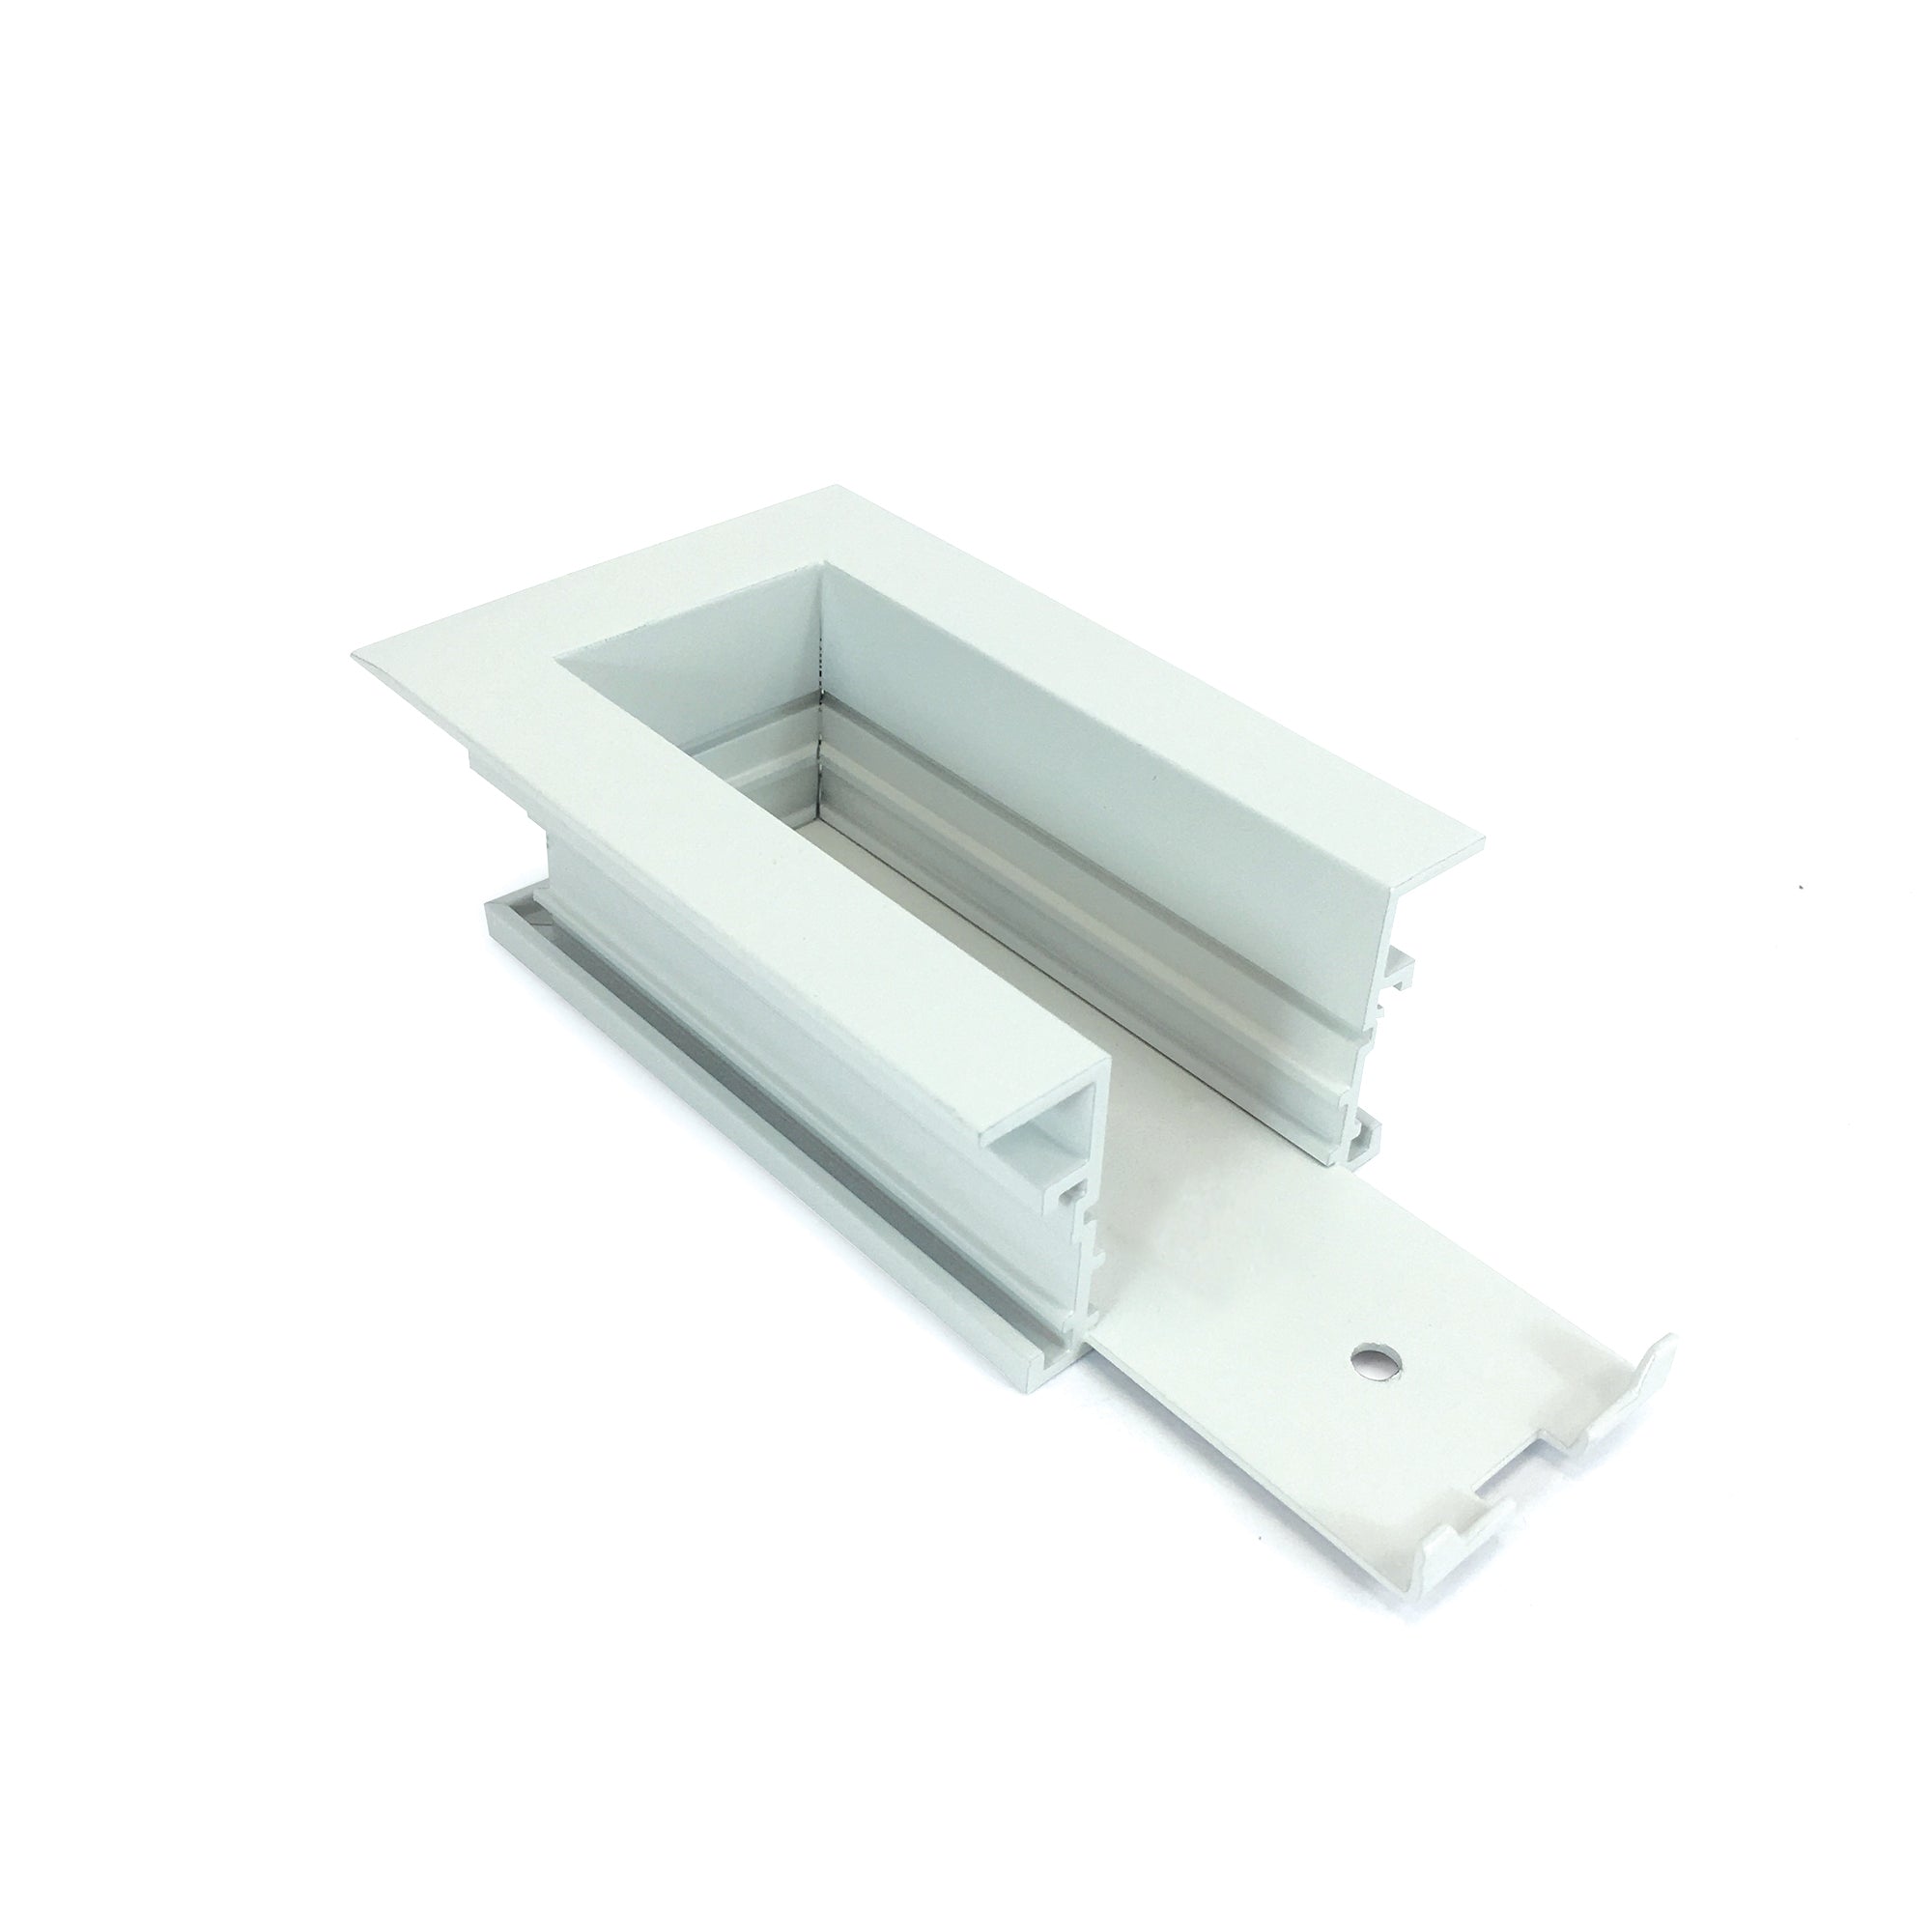 Nora Lighting NTRT-16W - Track - End Feed for Recessed Track, 1 or 2 Circuit Track, White